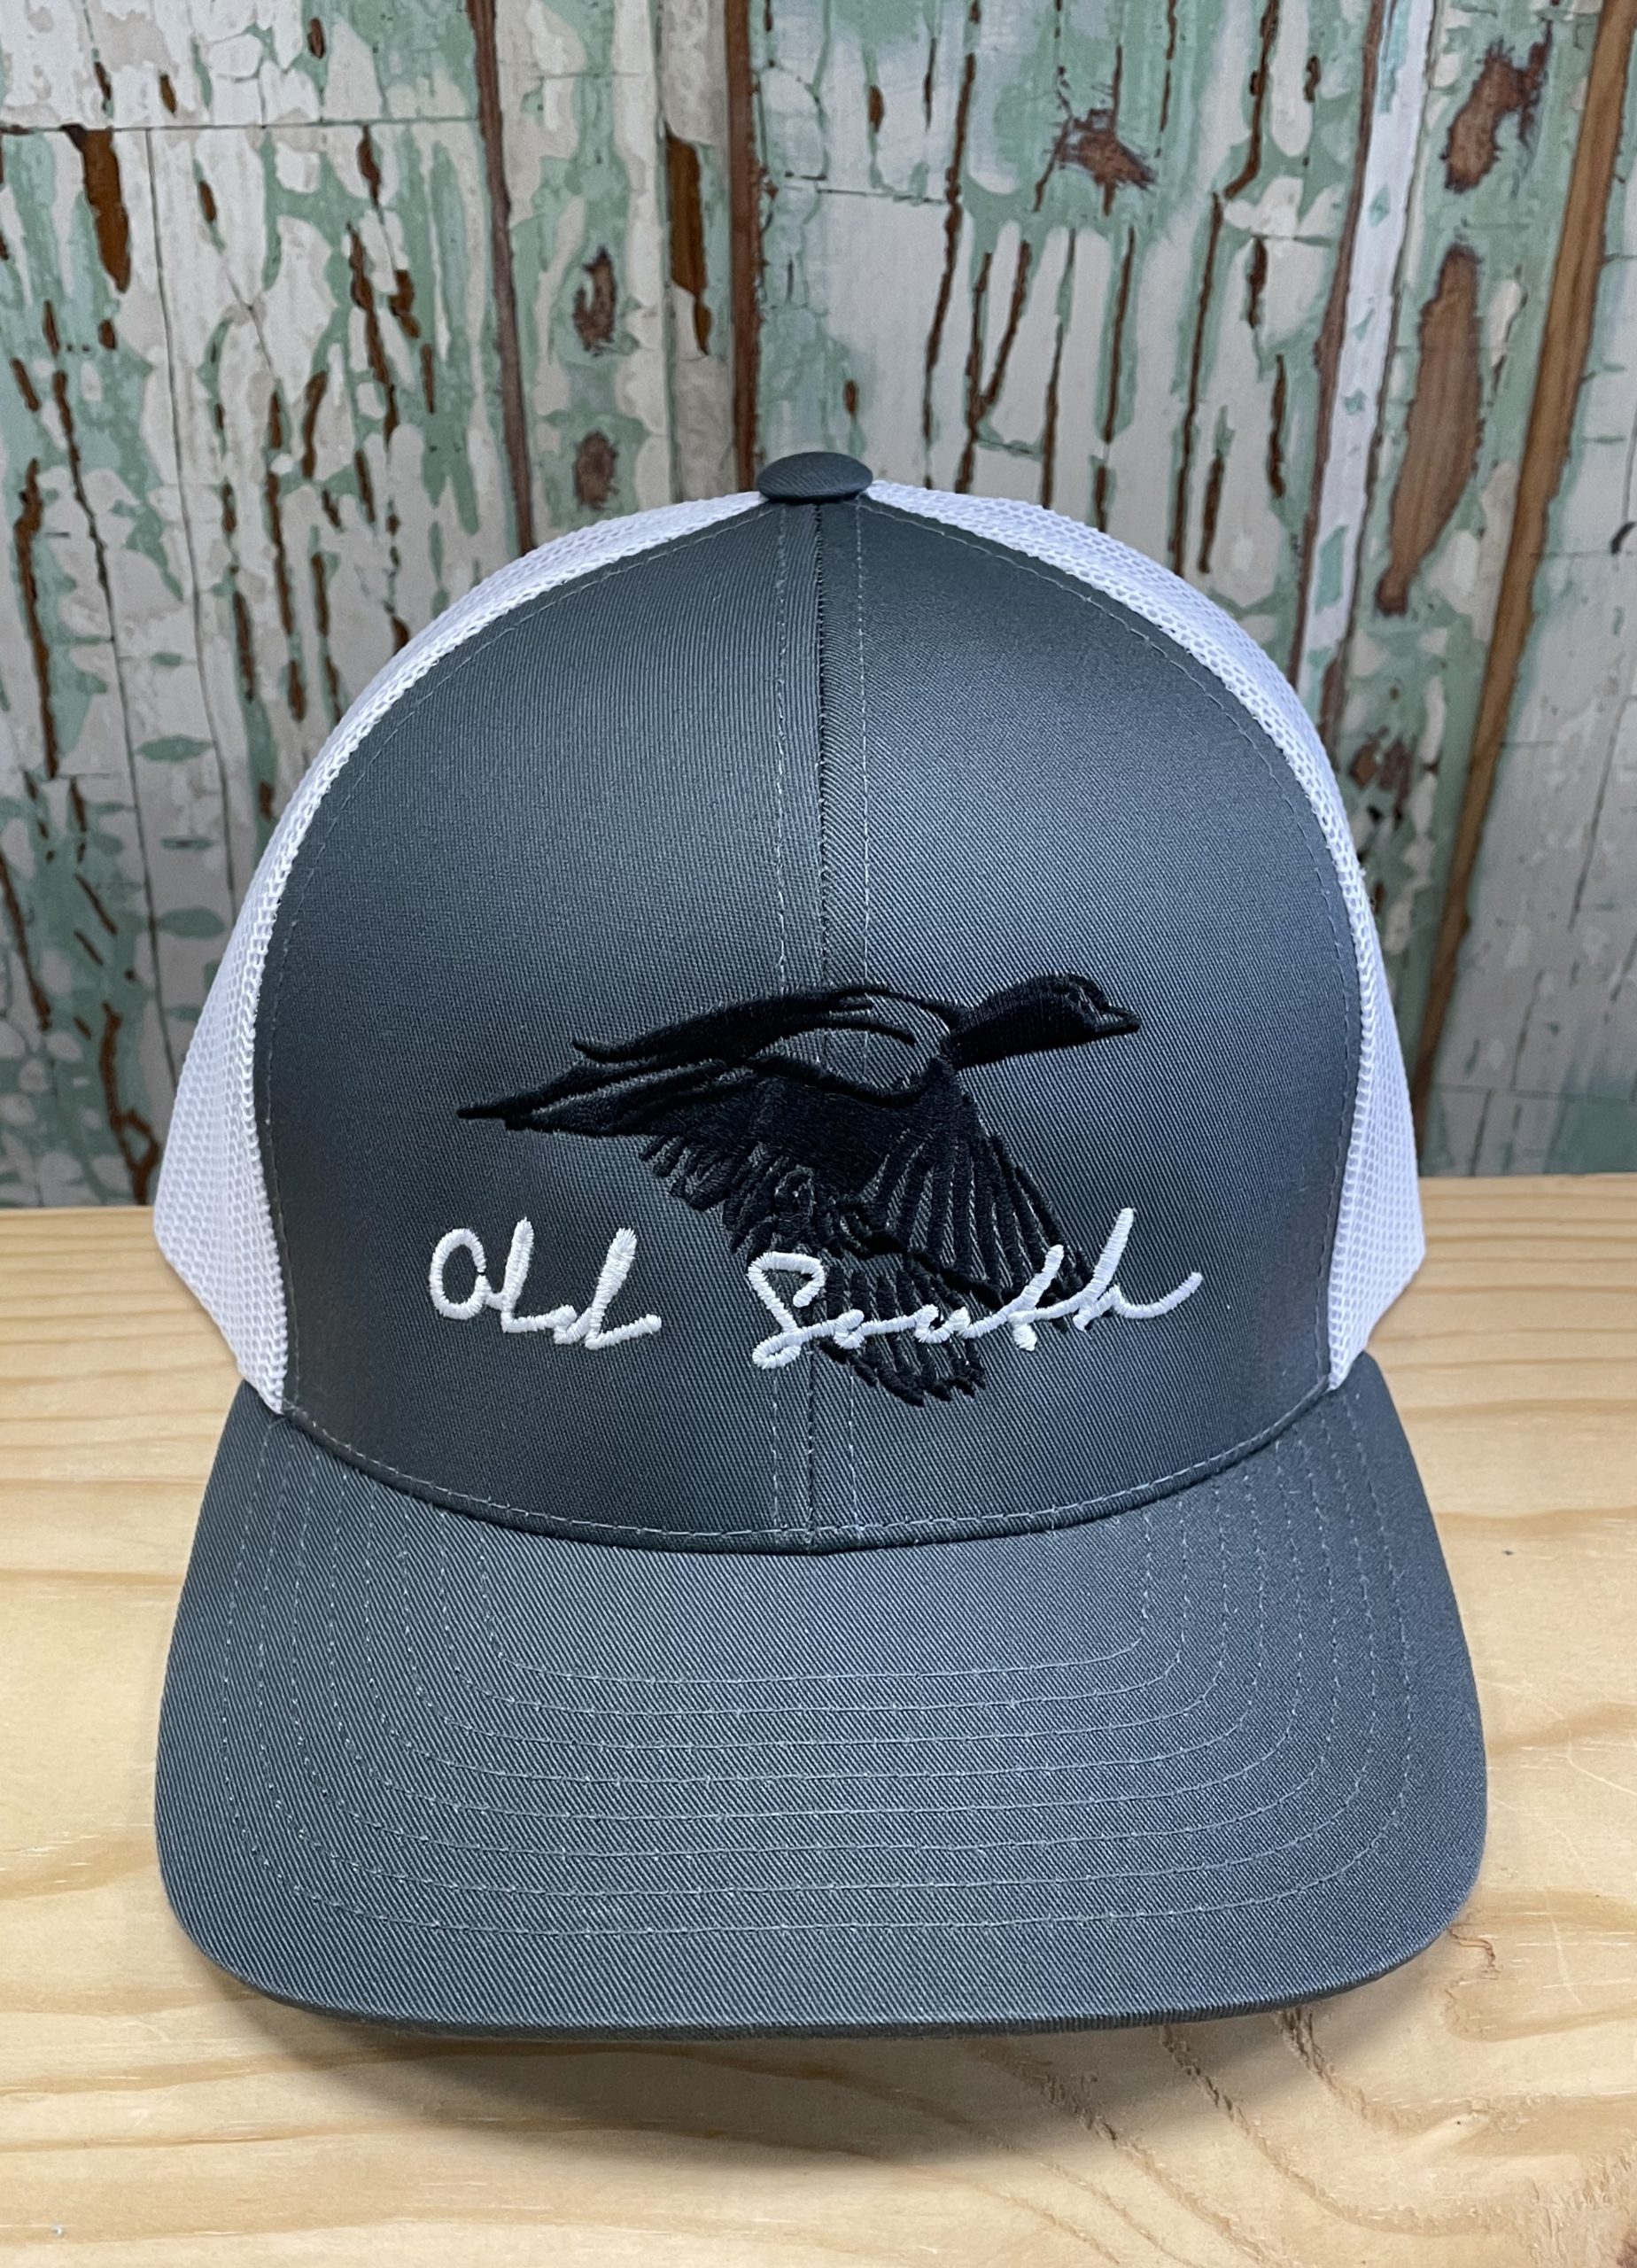 Old South Duck Snapback Trucker Hat Graphite/White